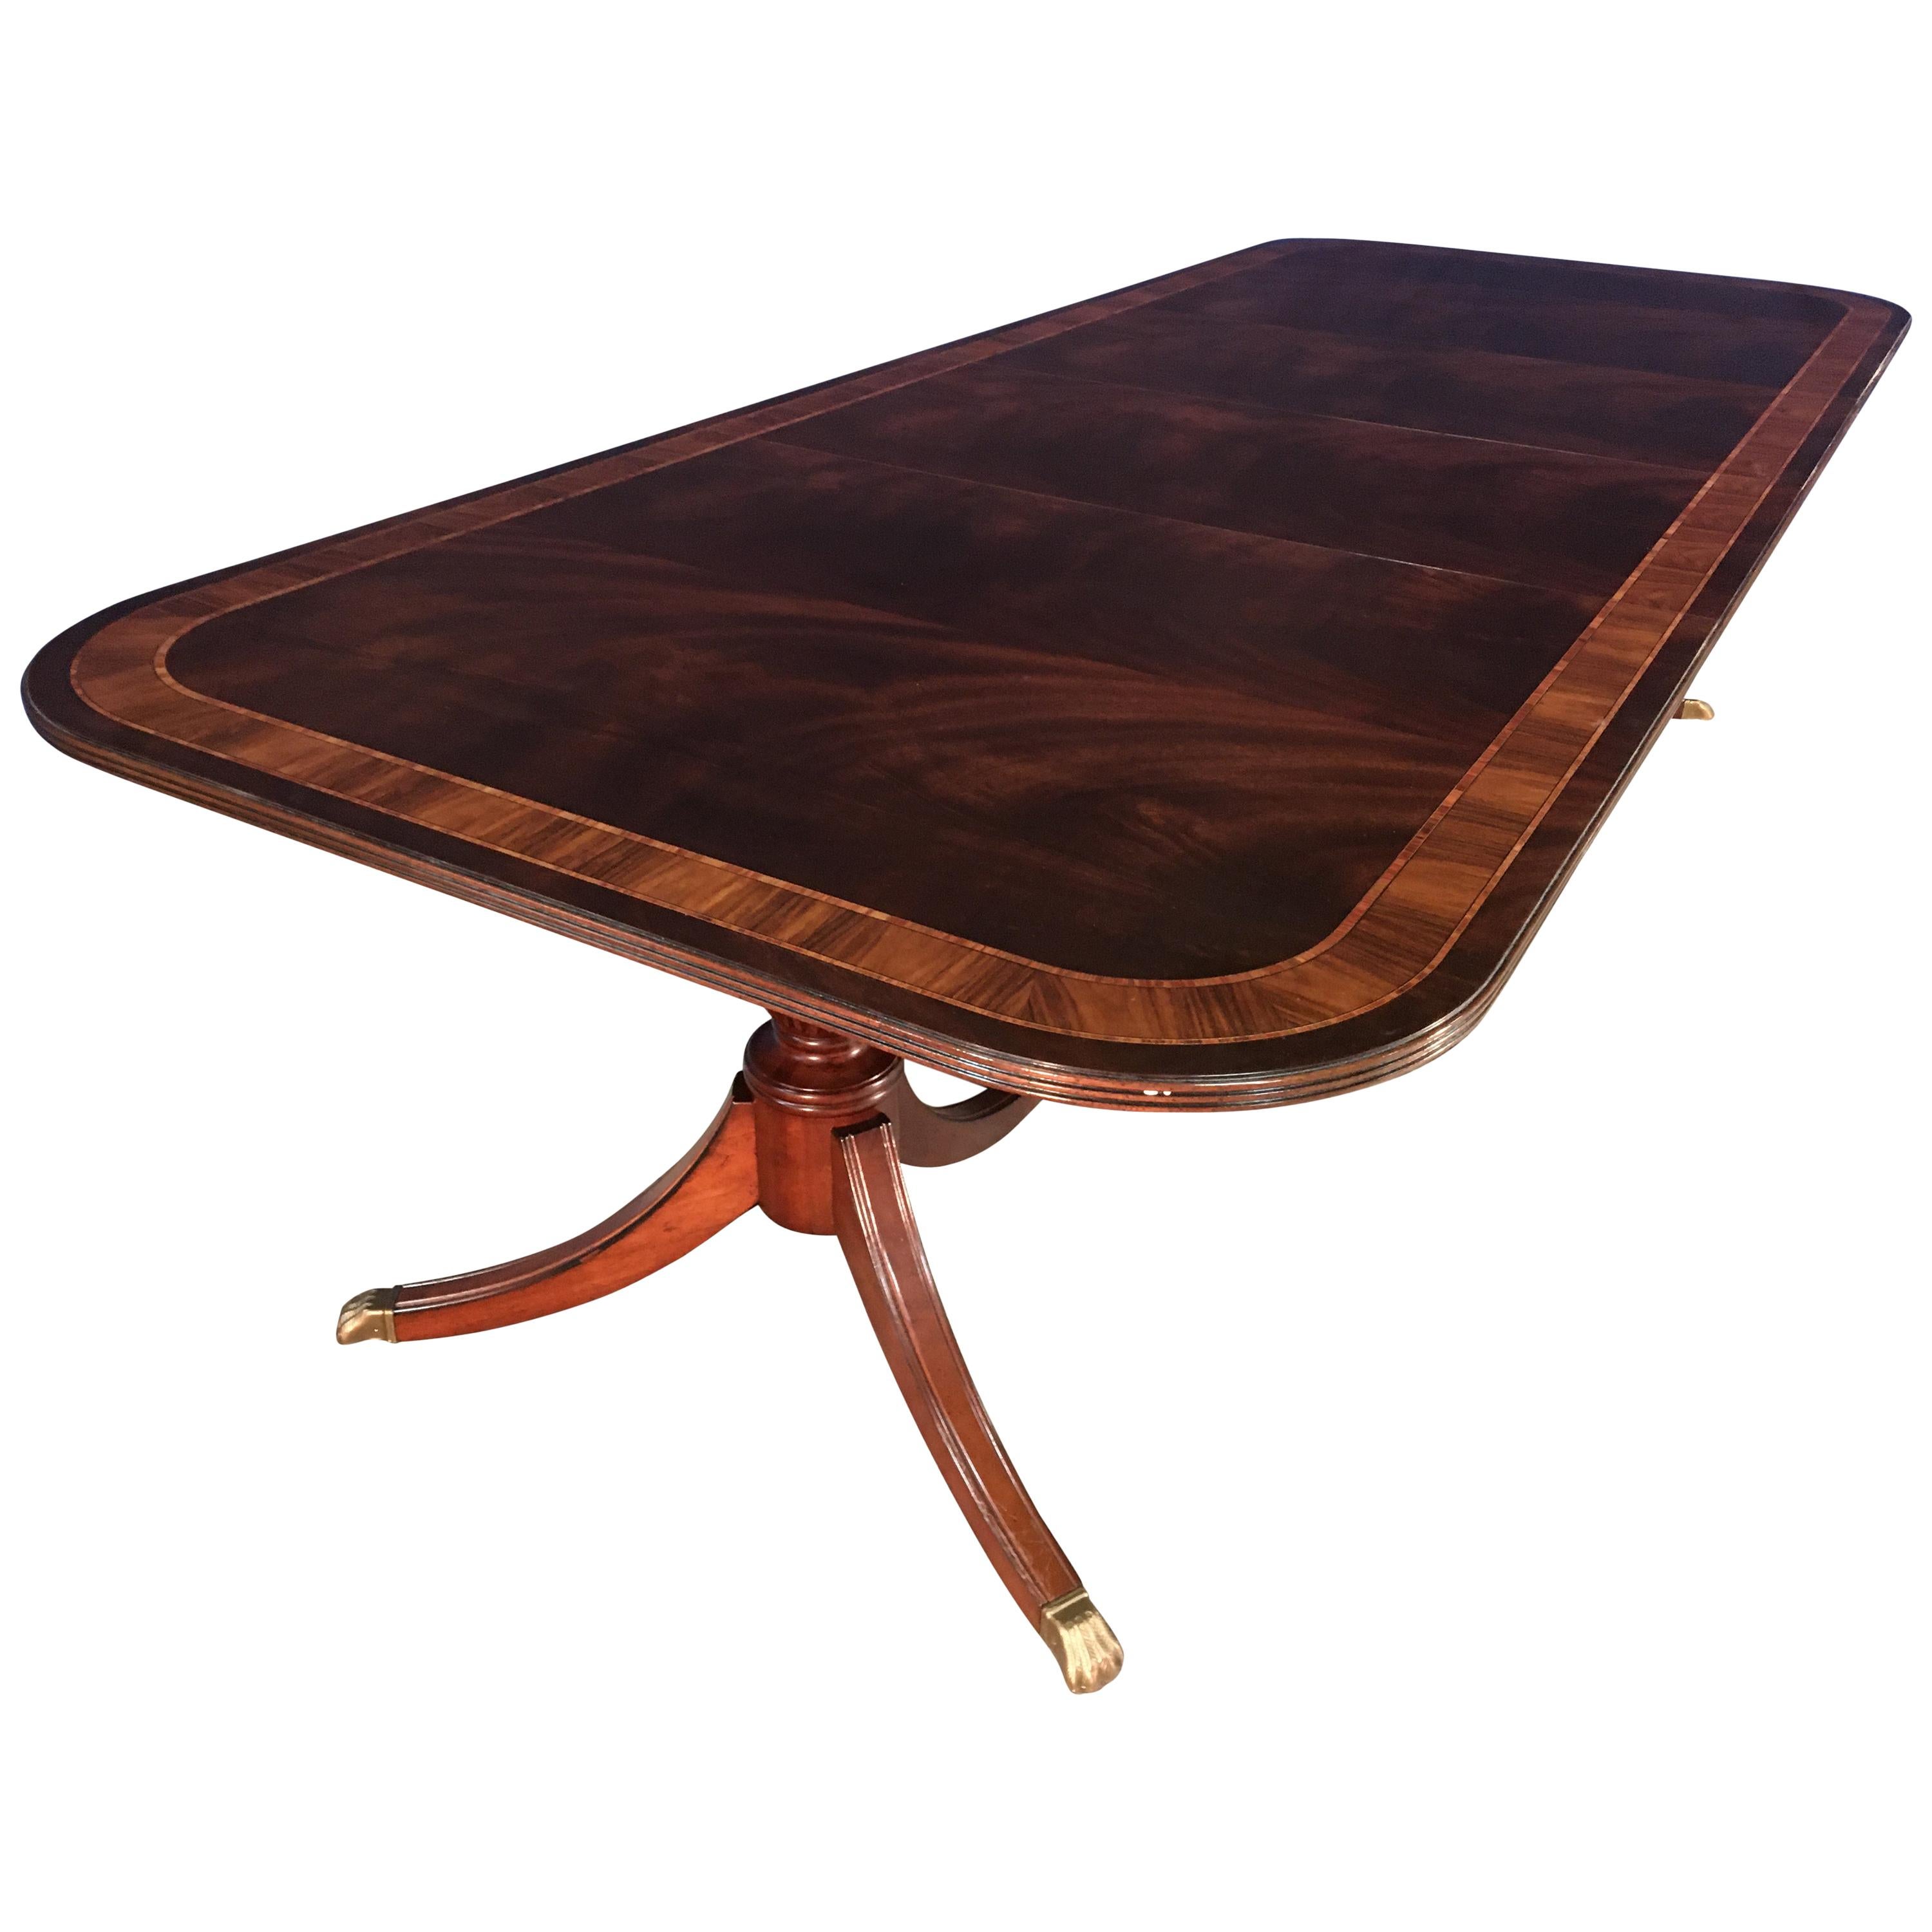 Custom Multi-Banded Mahogany Georgian Style Dining Table by Leighton Hall For Sale